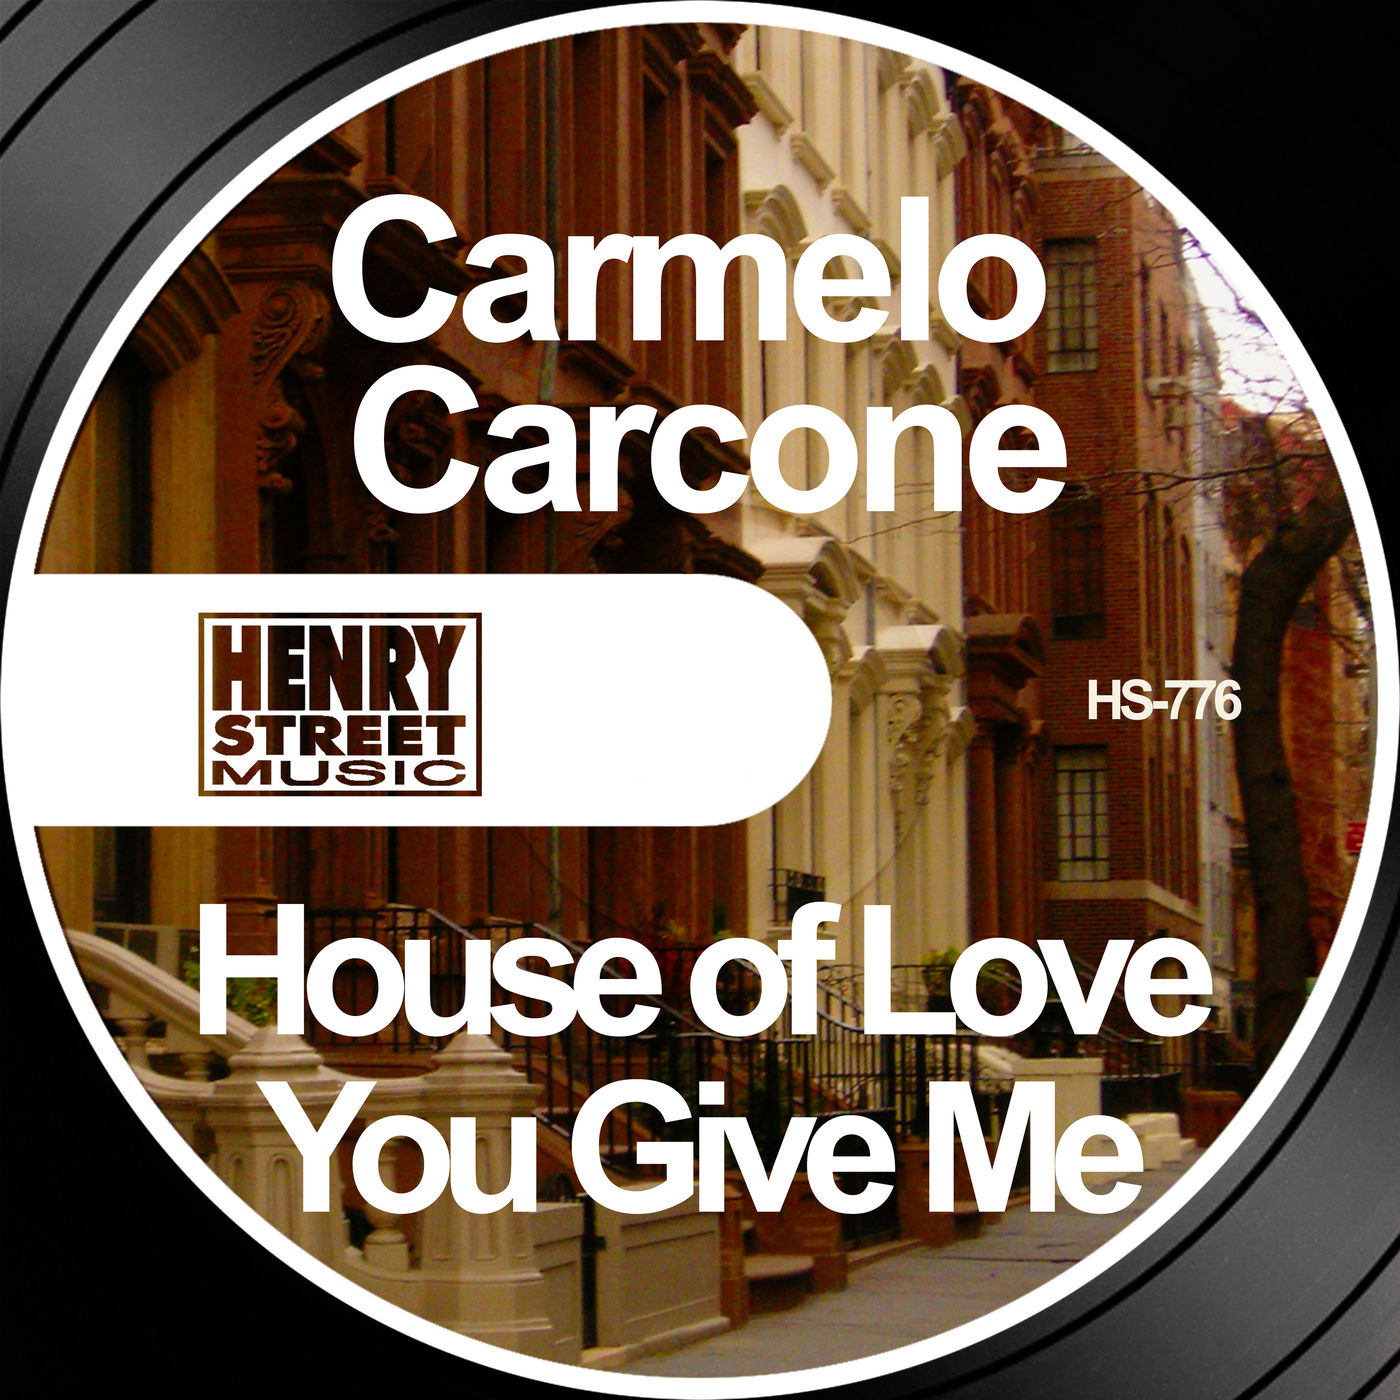 Carmelo Carone - House of Love / You Give Me / Henry Street Music